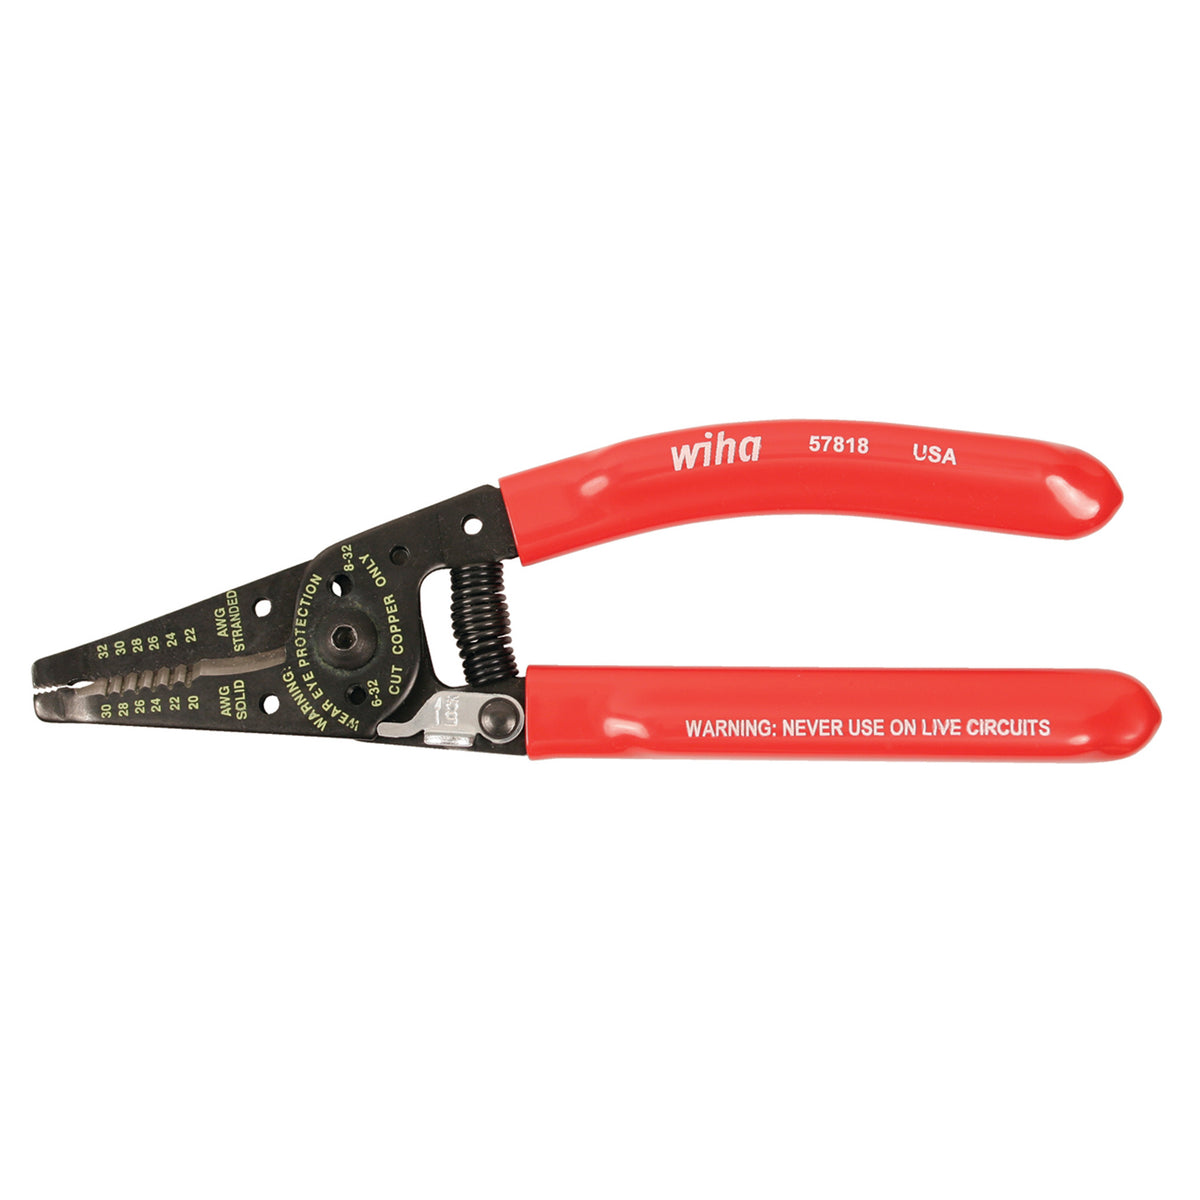 Wiha 57818 Classic Grip Wire Strippers and Cutters 7.25"